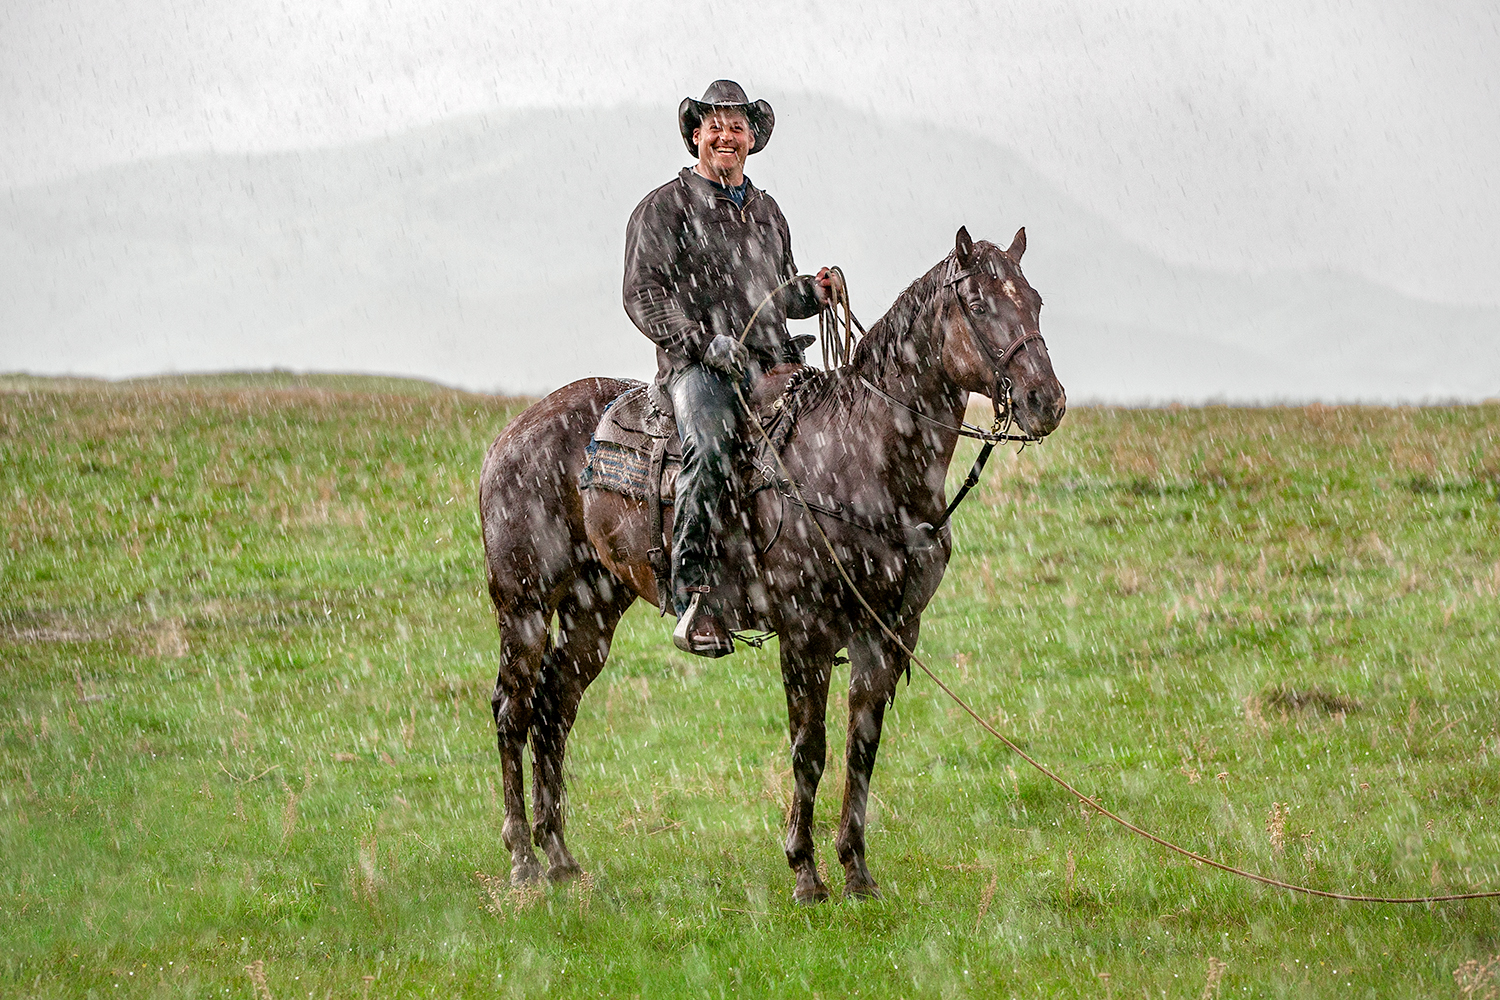 Cowboy Riding Horse in the Rain Smiling